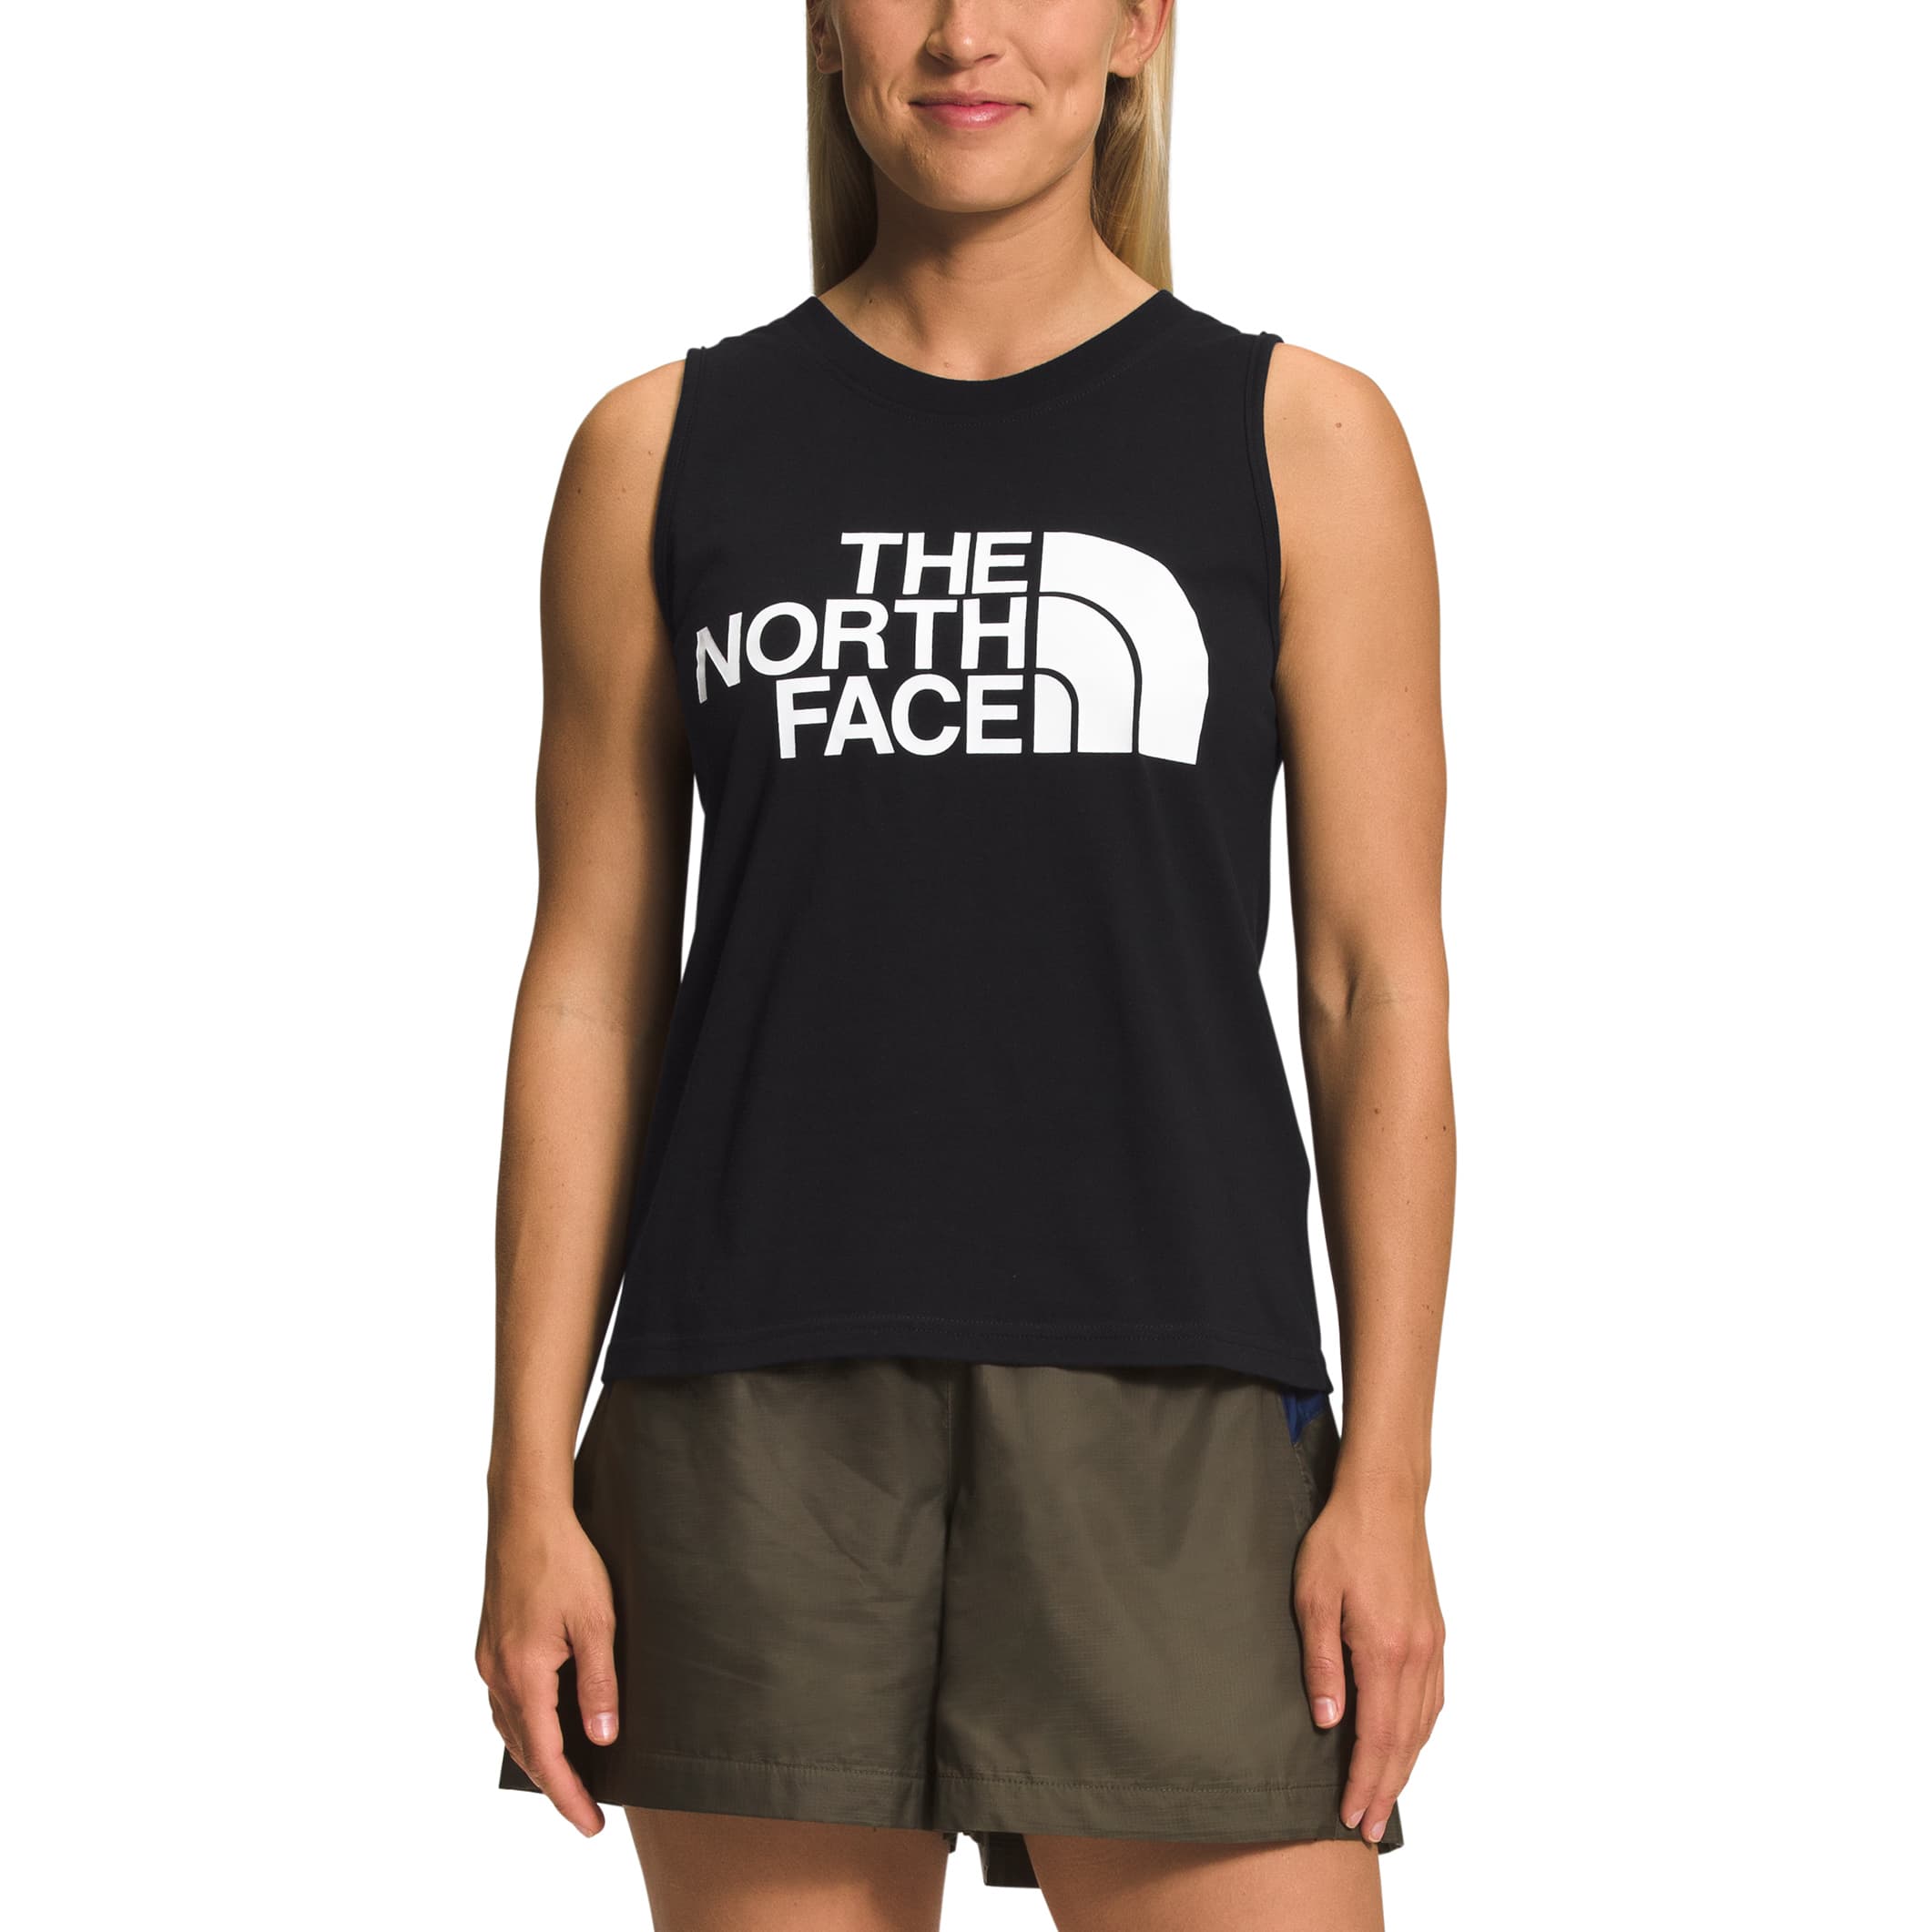 Buy The North Face Men's Graphic Half Dome T-Shirt 2024 Online